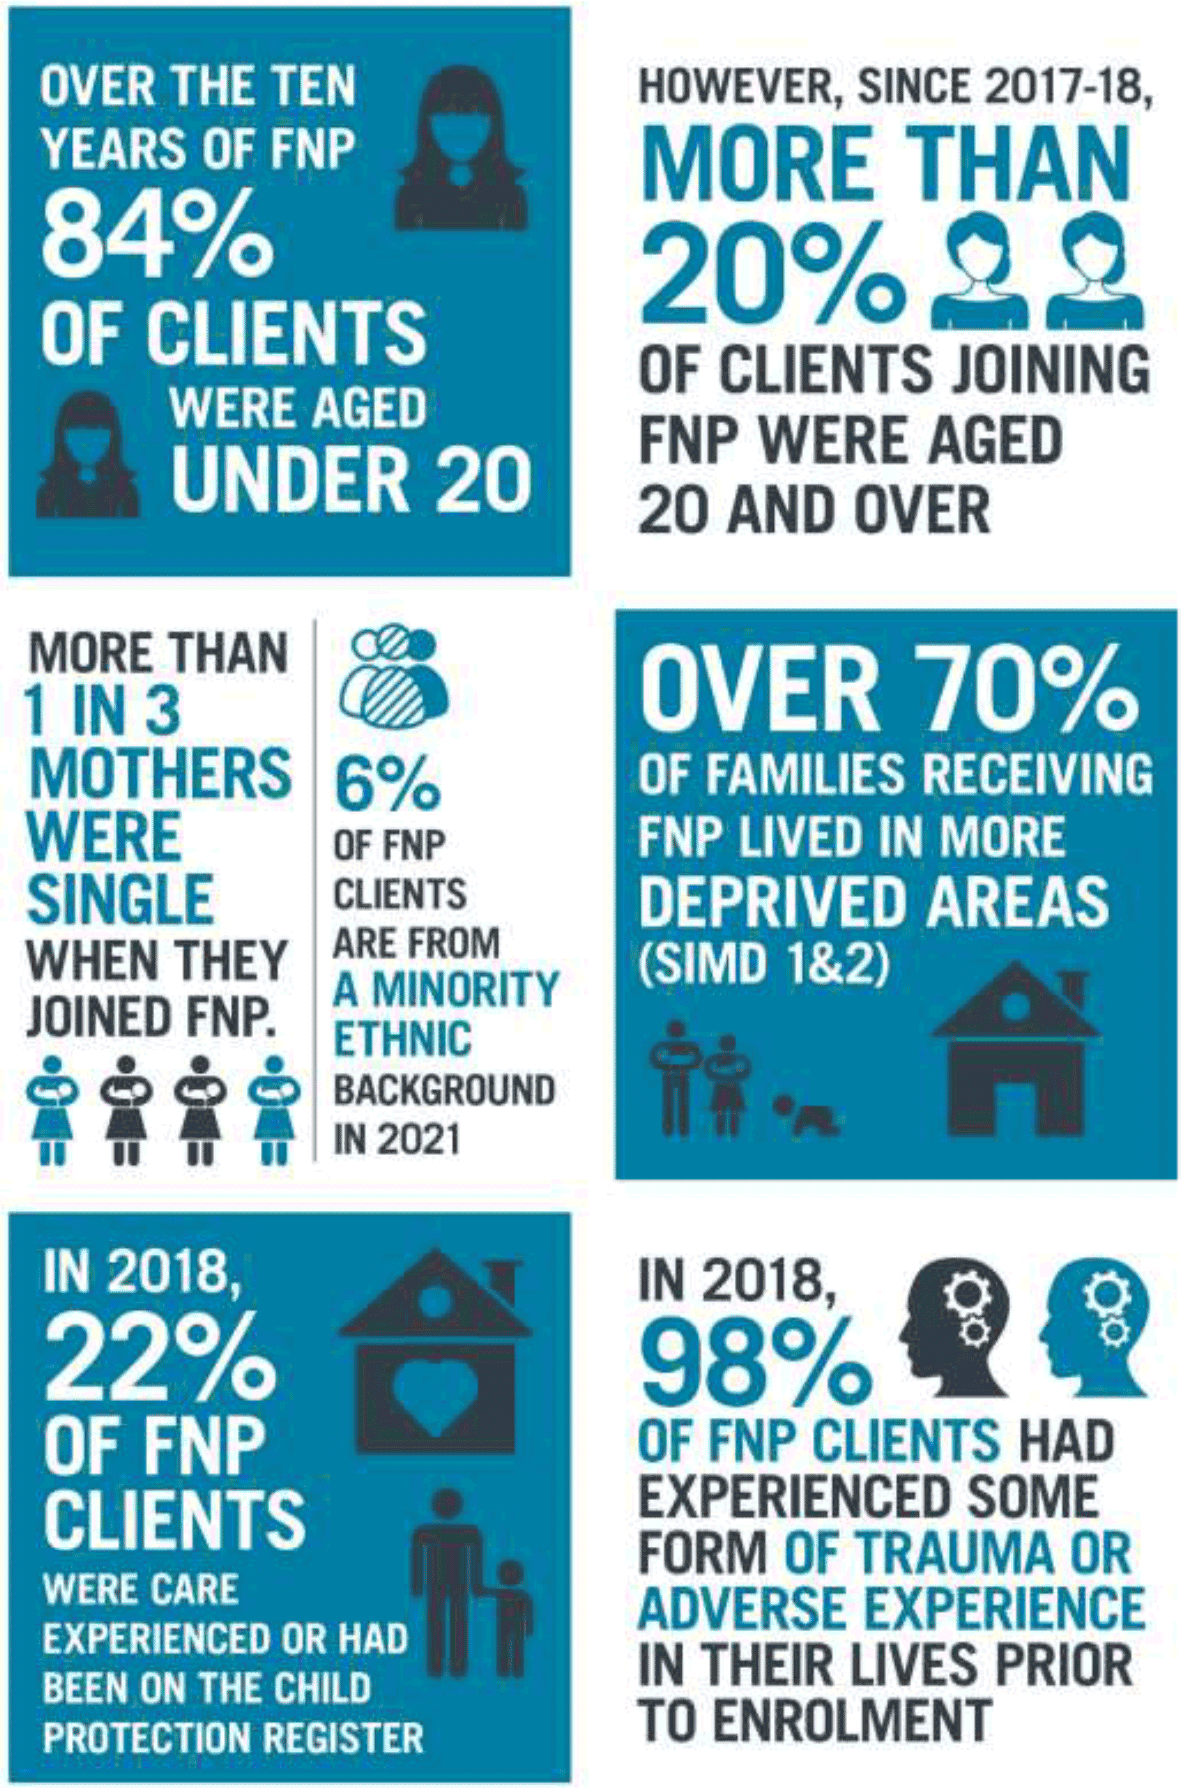 the infographics relate to the information in Section 1 Intake and Client Characteristics. They provide some of the statistics in a designed format.